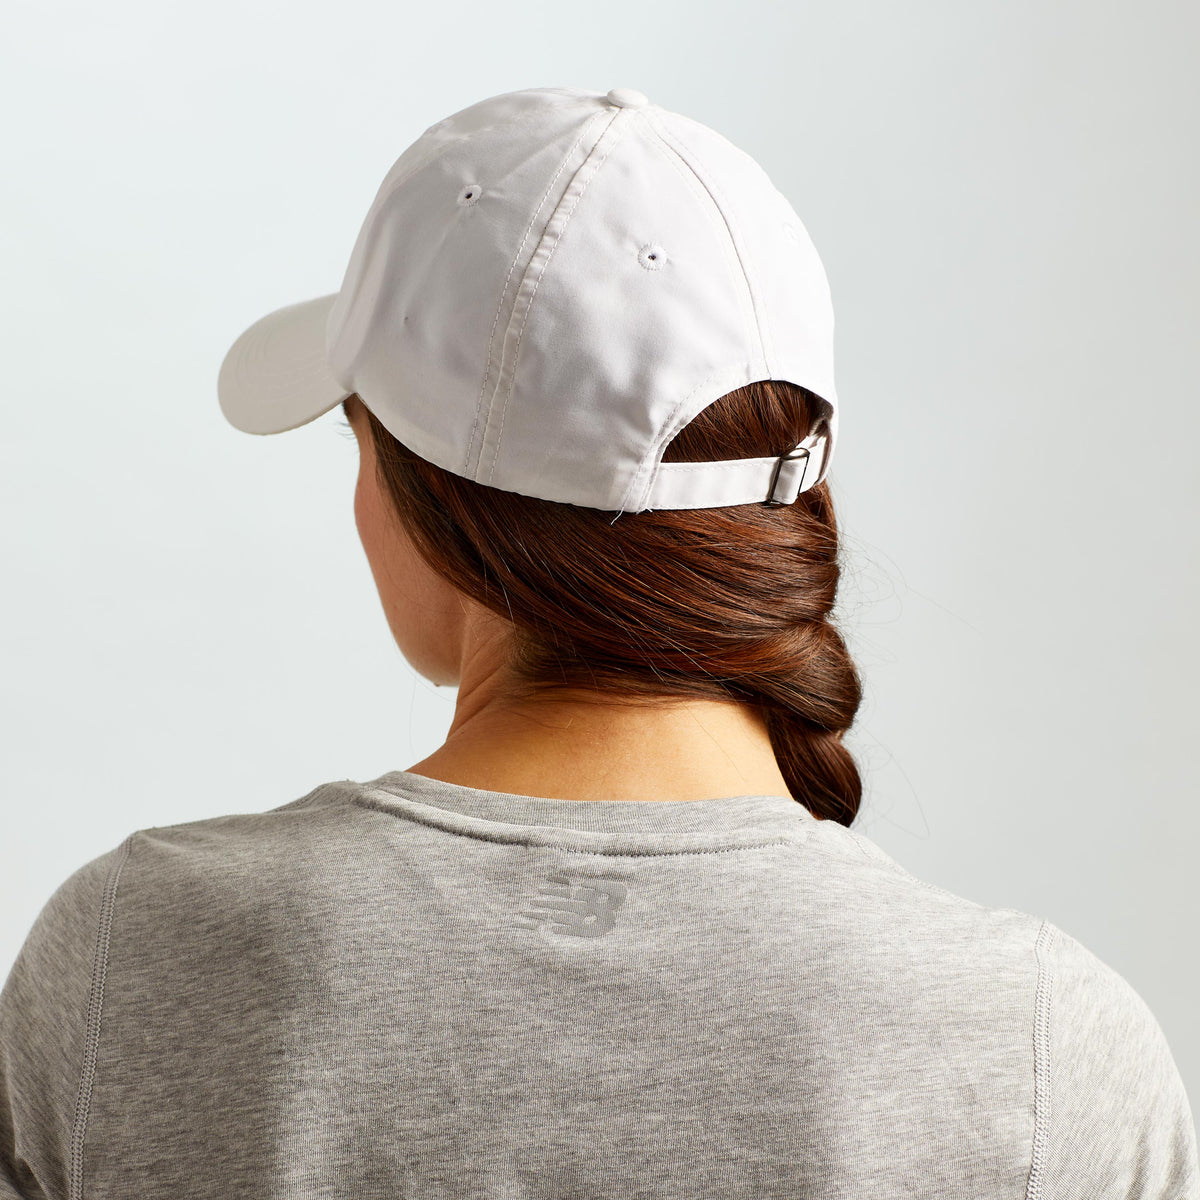 Behind view of the Classic Solara UV Protection Fitness Hat in white - shows the adjustable buckle